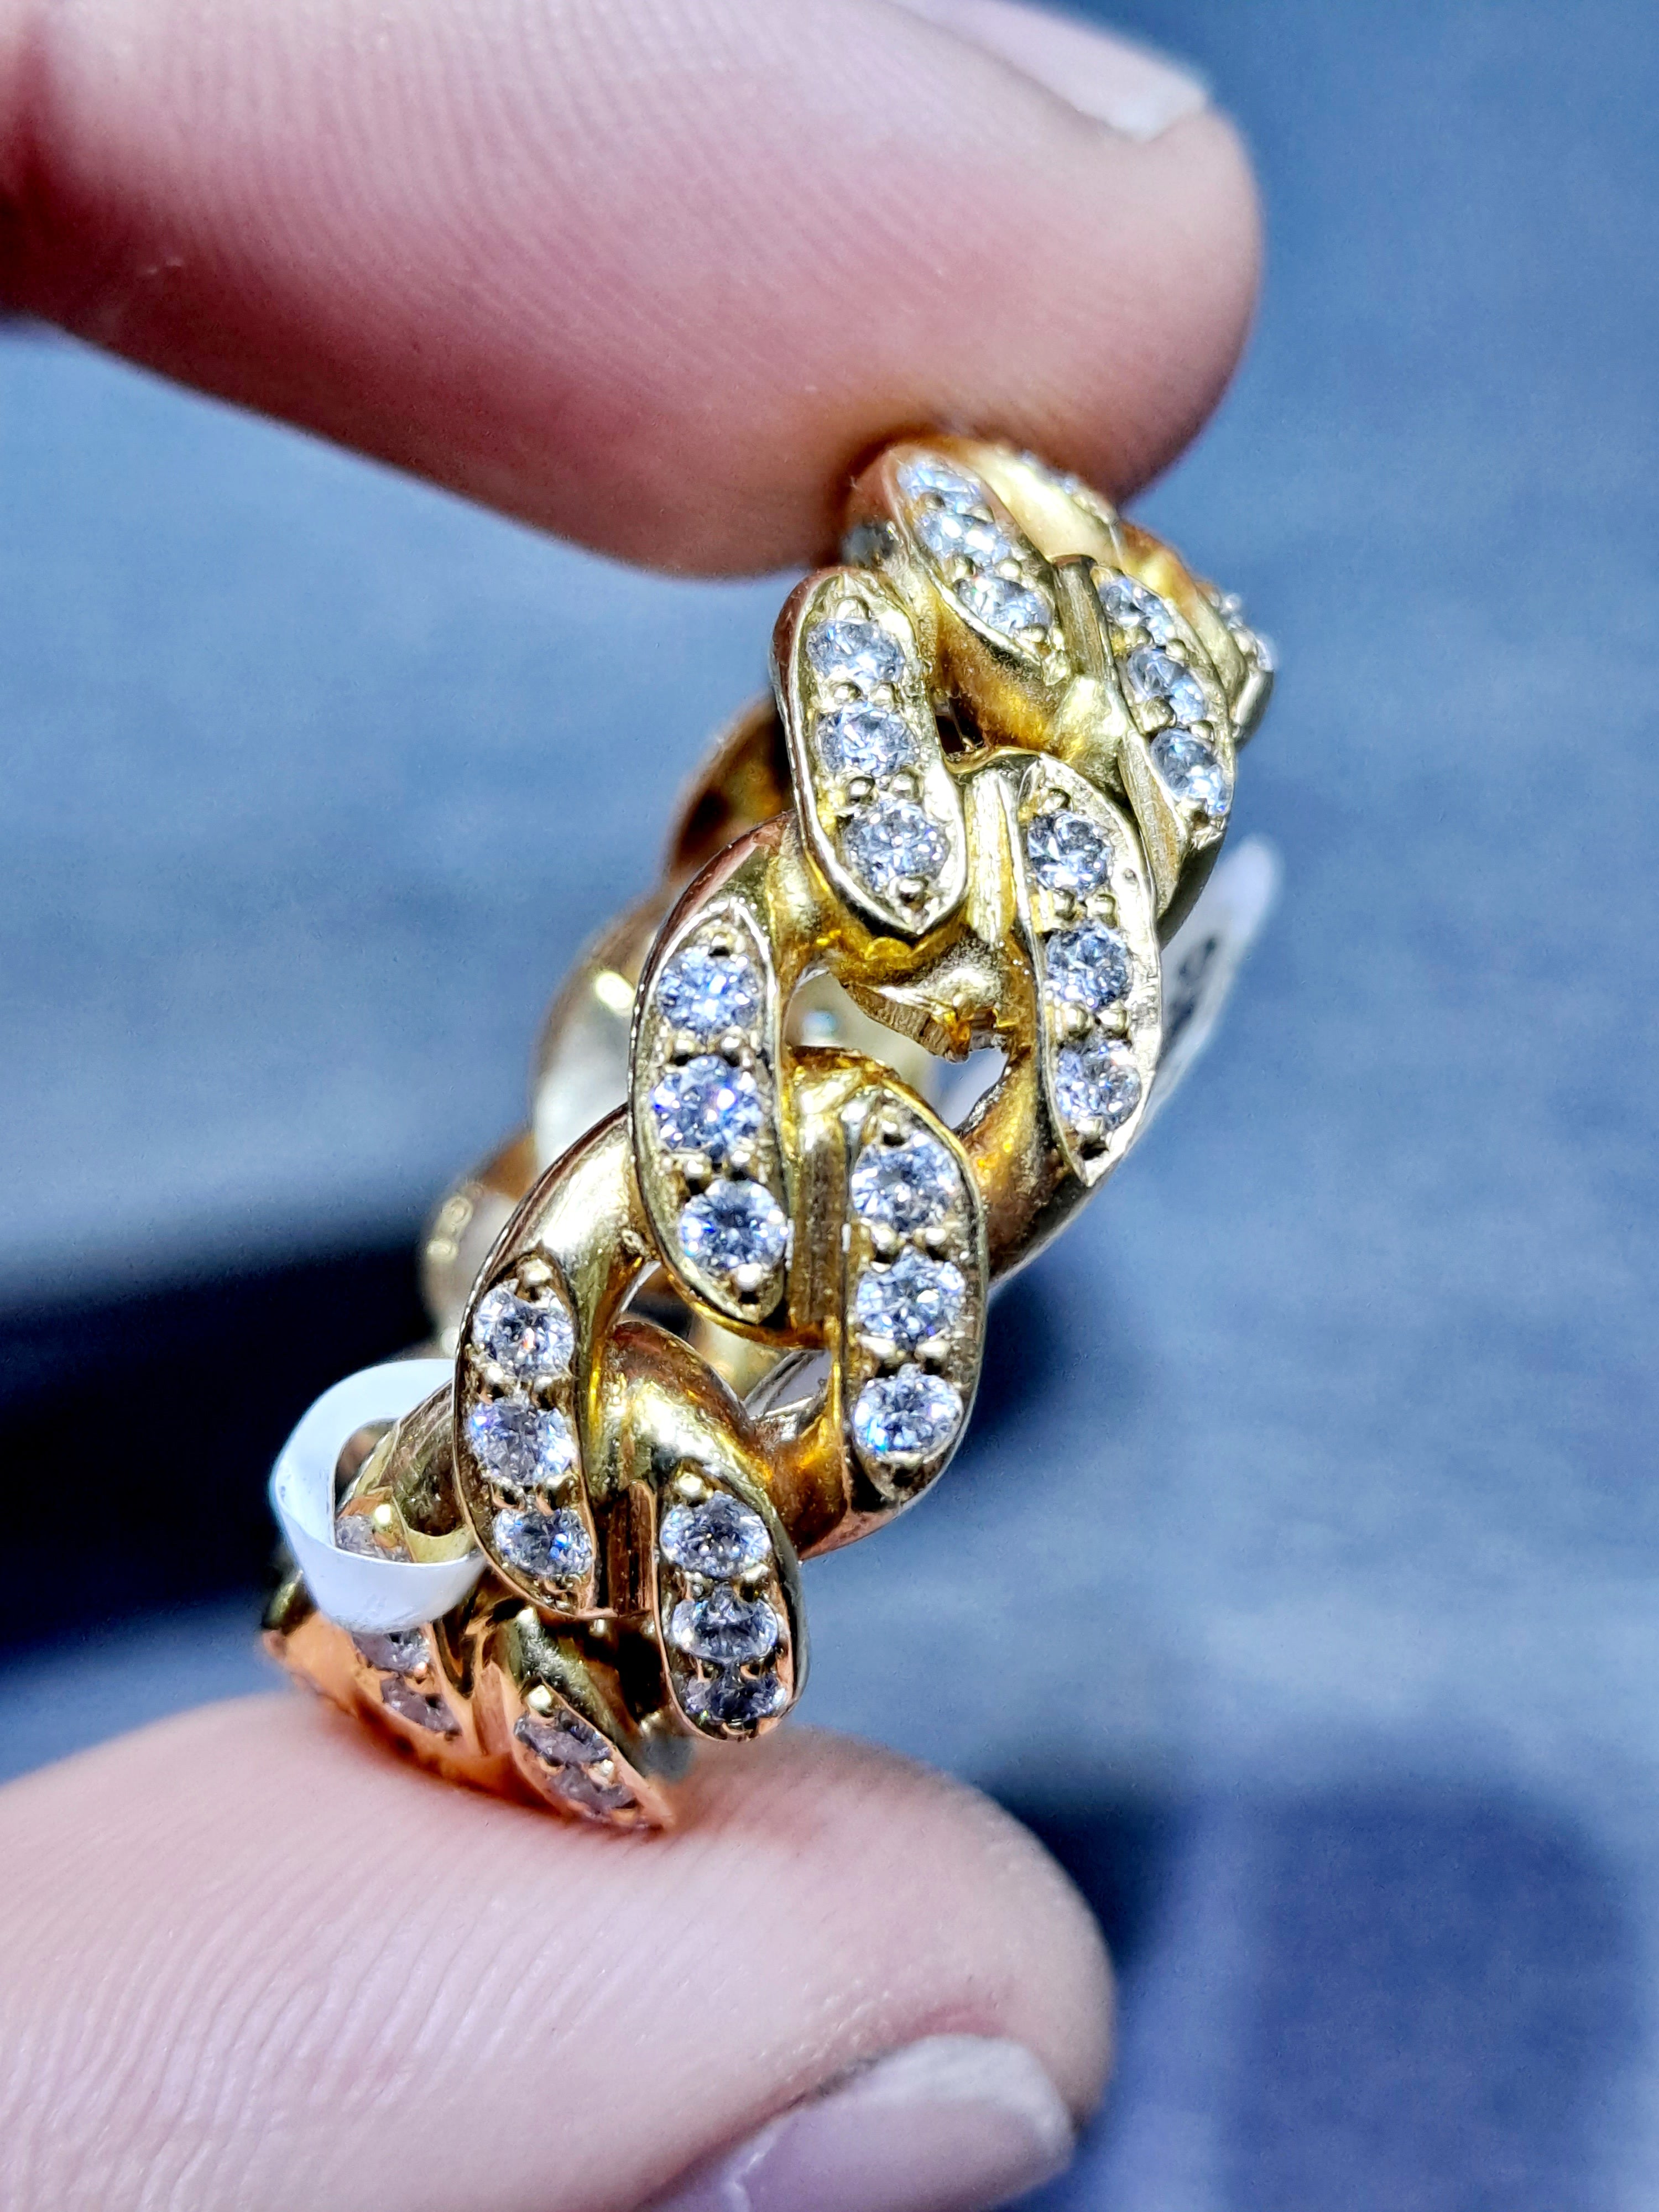 14k new handmade solid miami cuban link ring  with 1.77 carats vs-1natural diamonds